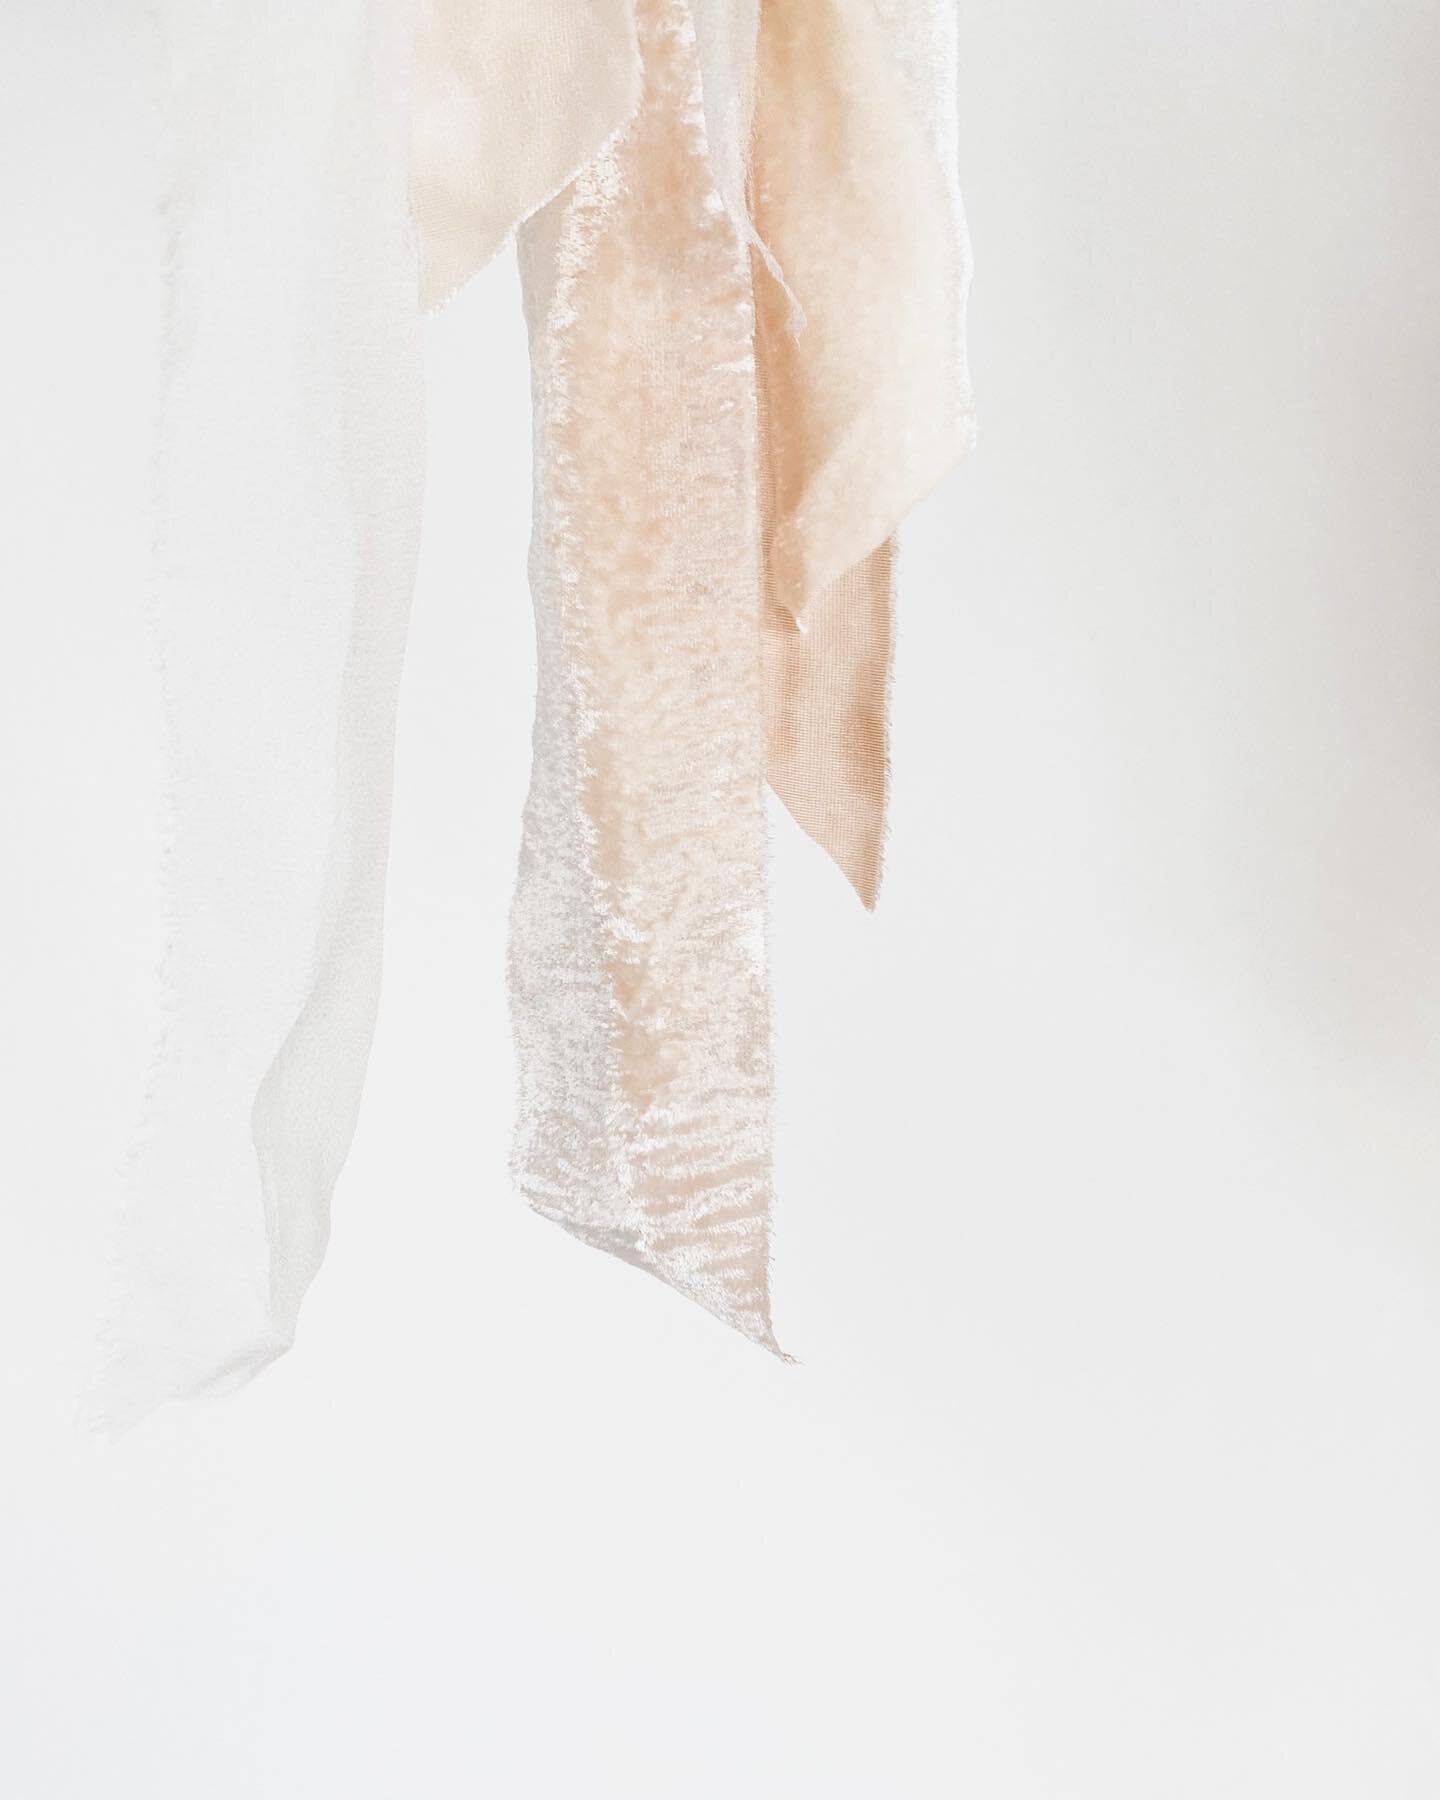 Ribbons dancing in the light. ⠀
⠀
All of the ribbons I use are torn by hand from beautiful, real, silk and hand-dyed from my homemade natural dyes. The dyes are made exclusively from plants and food waste. ⠀
⠀
I believe it adds a unique touch to ever